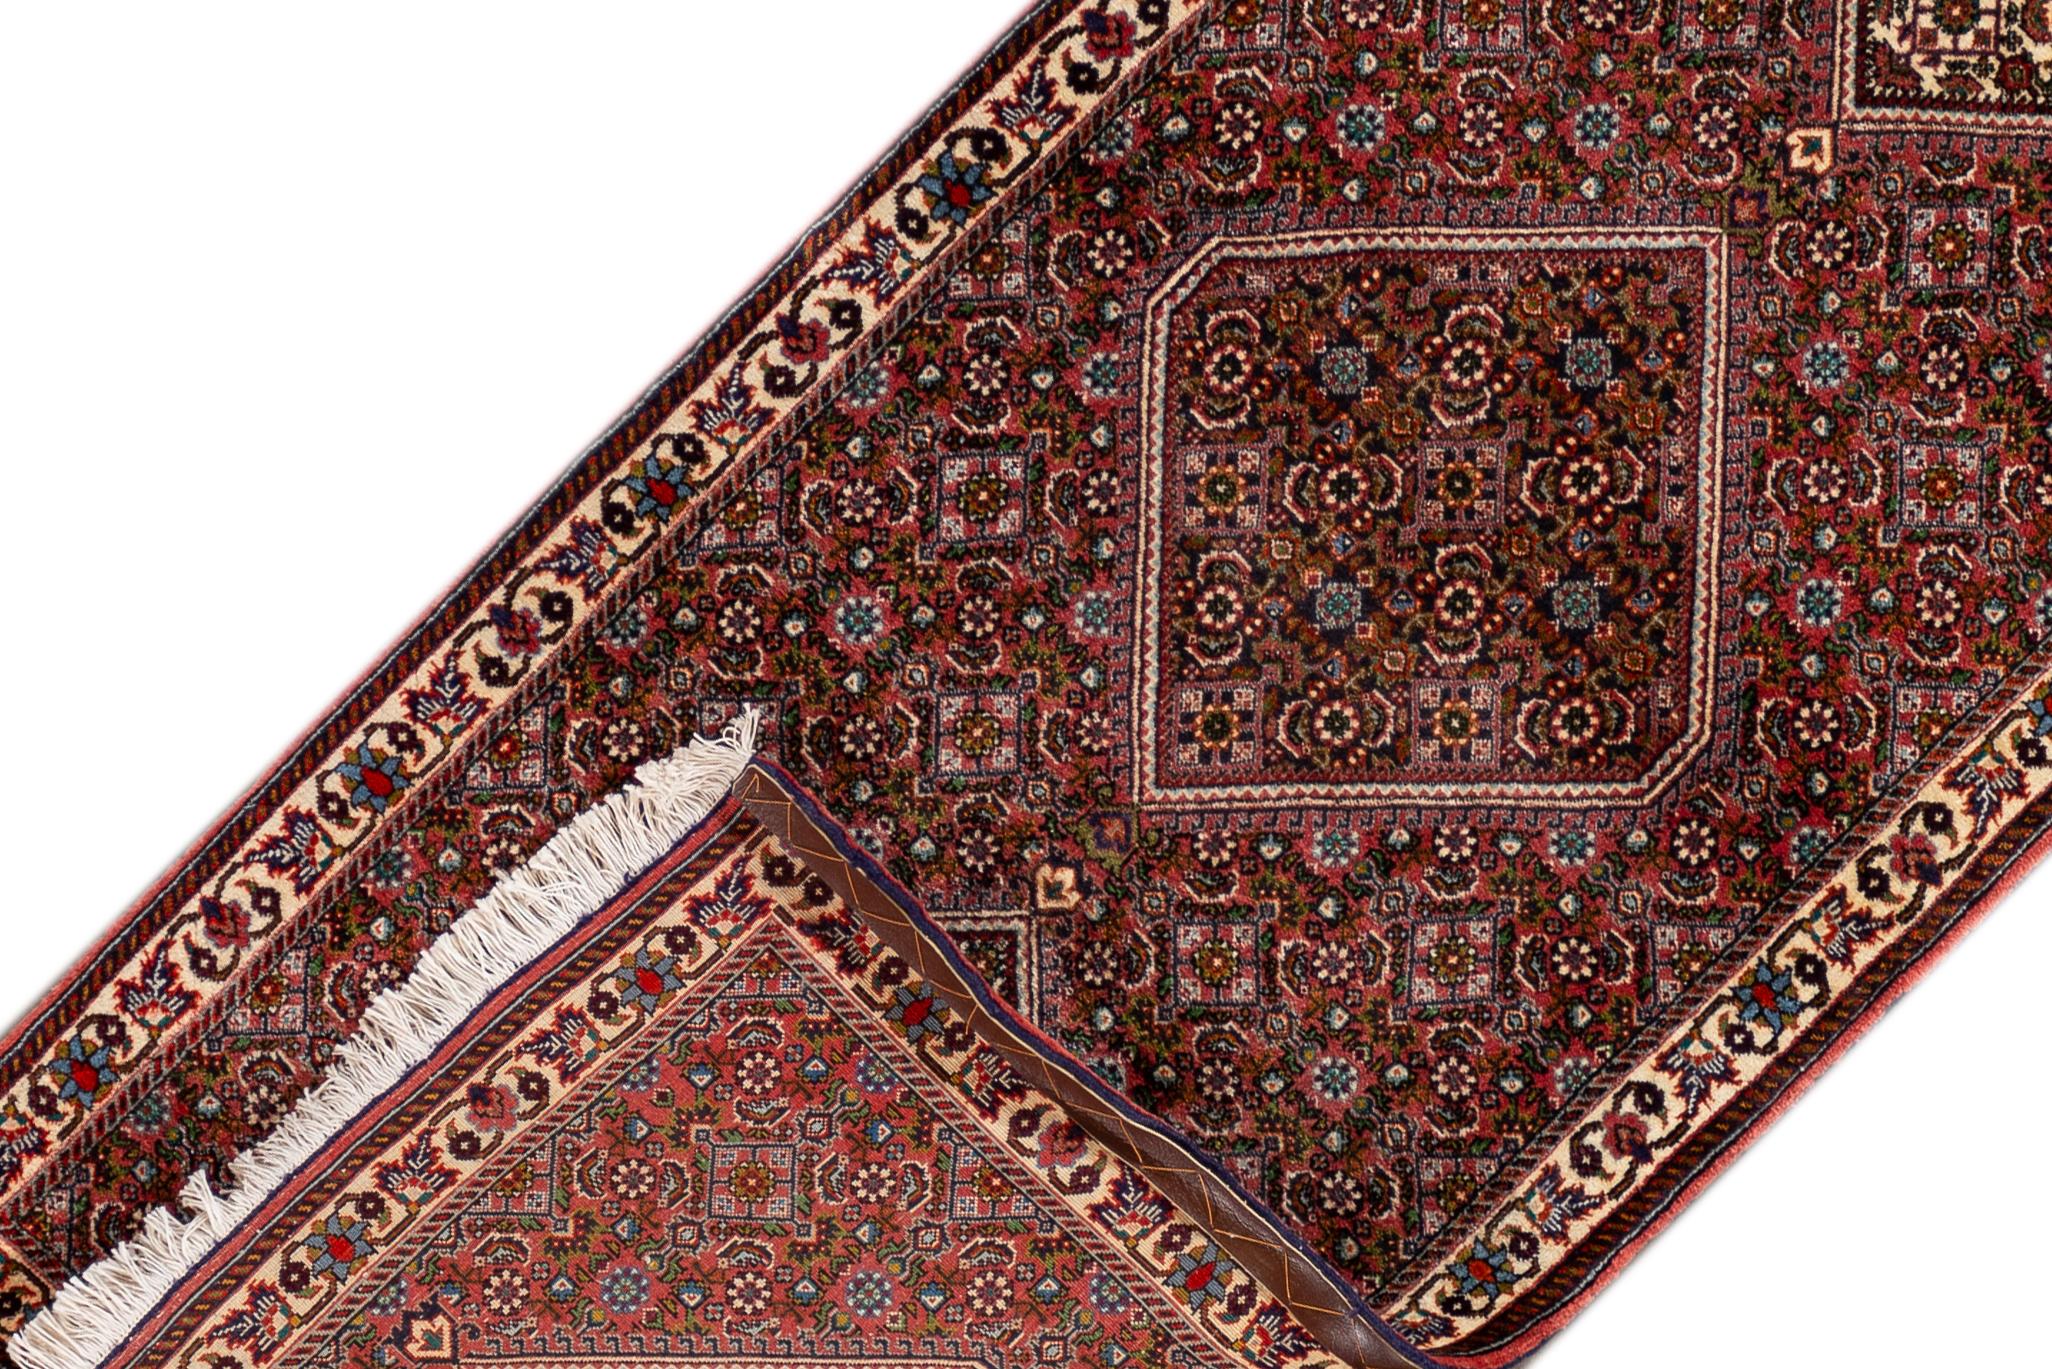 A 21st century modern Bidjar rug with a red geometric multi-medallion motif. This rug measures at 2'6